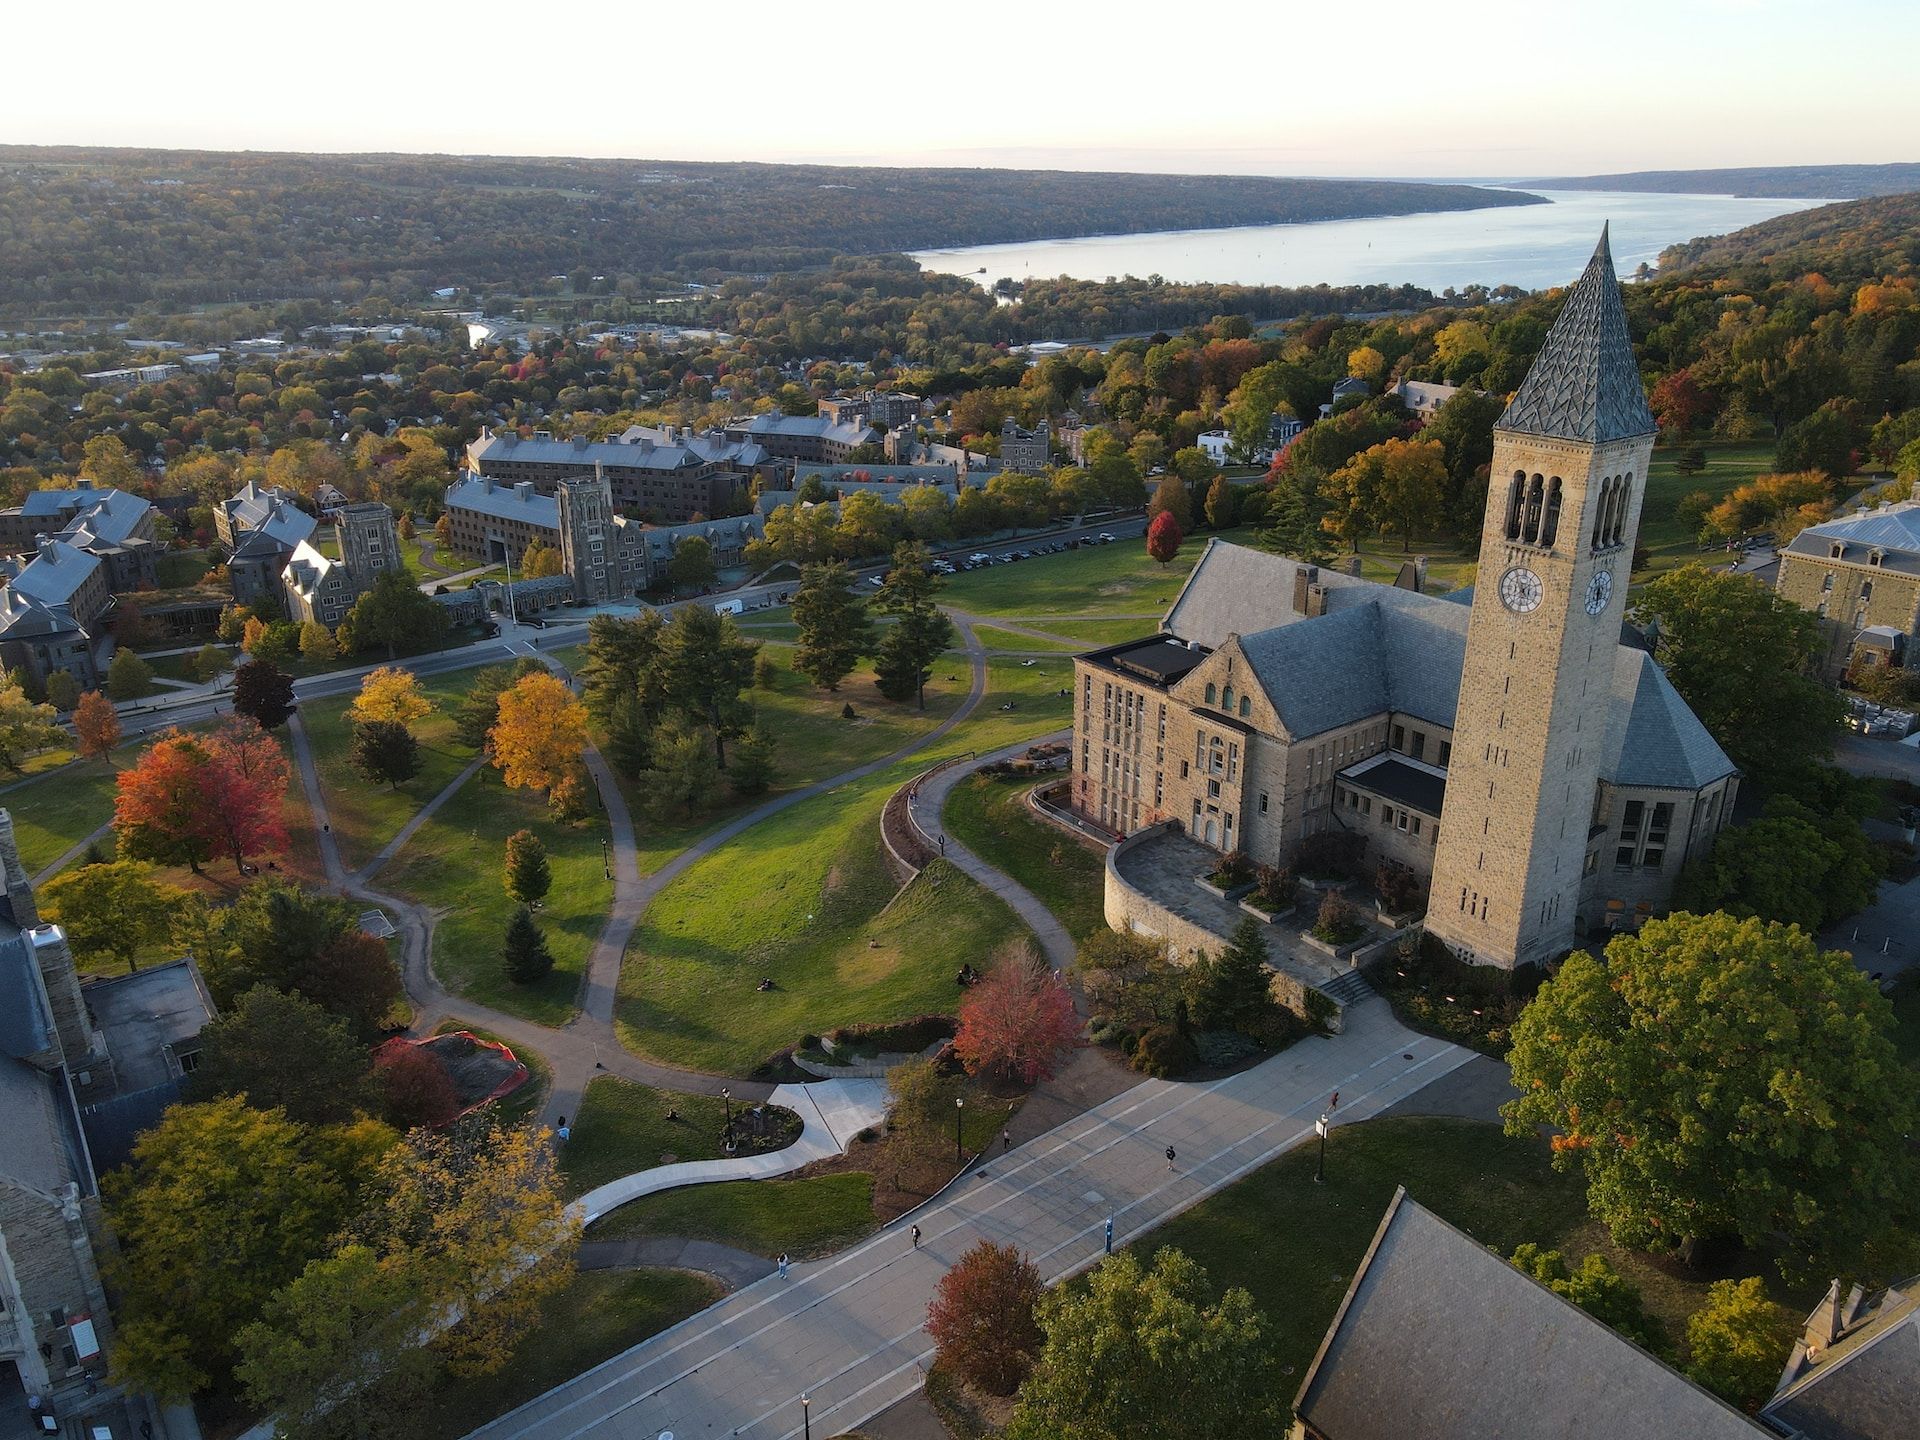 Cornell University and surrounding natural landscape in Ithaca, New York